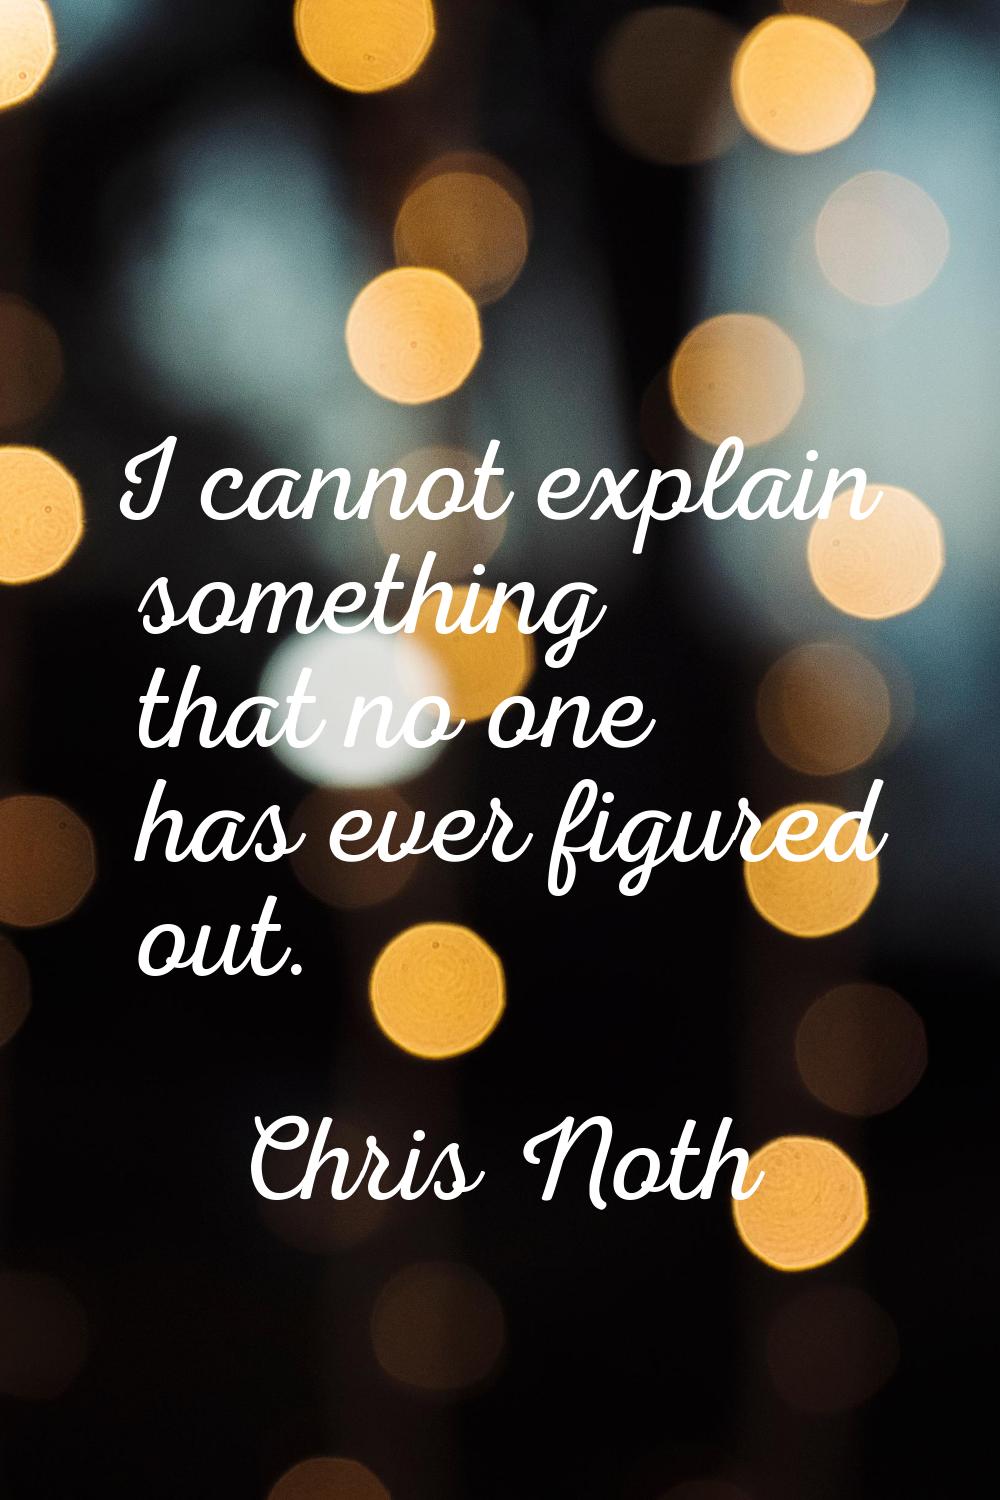 I cannot explain something that no one has ever figured out.